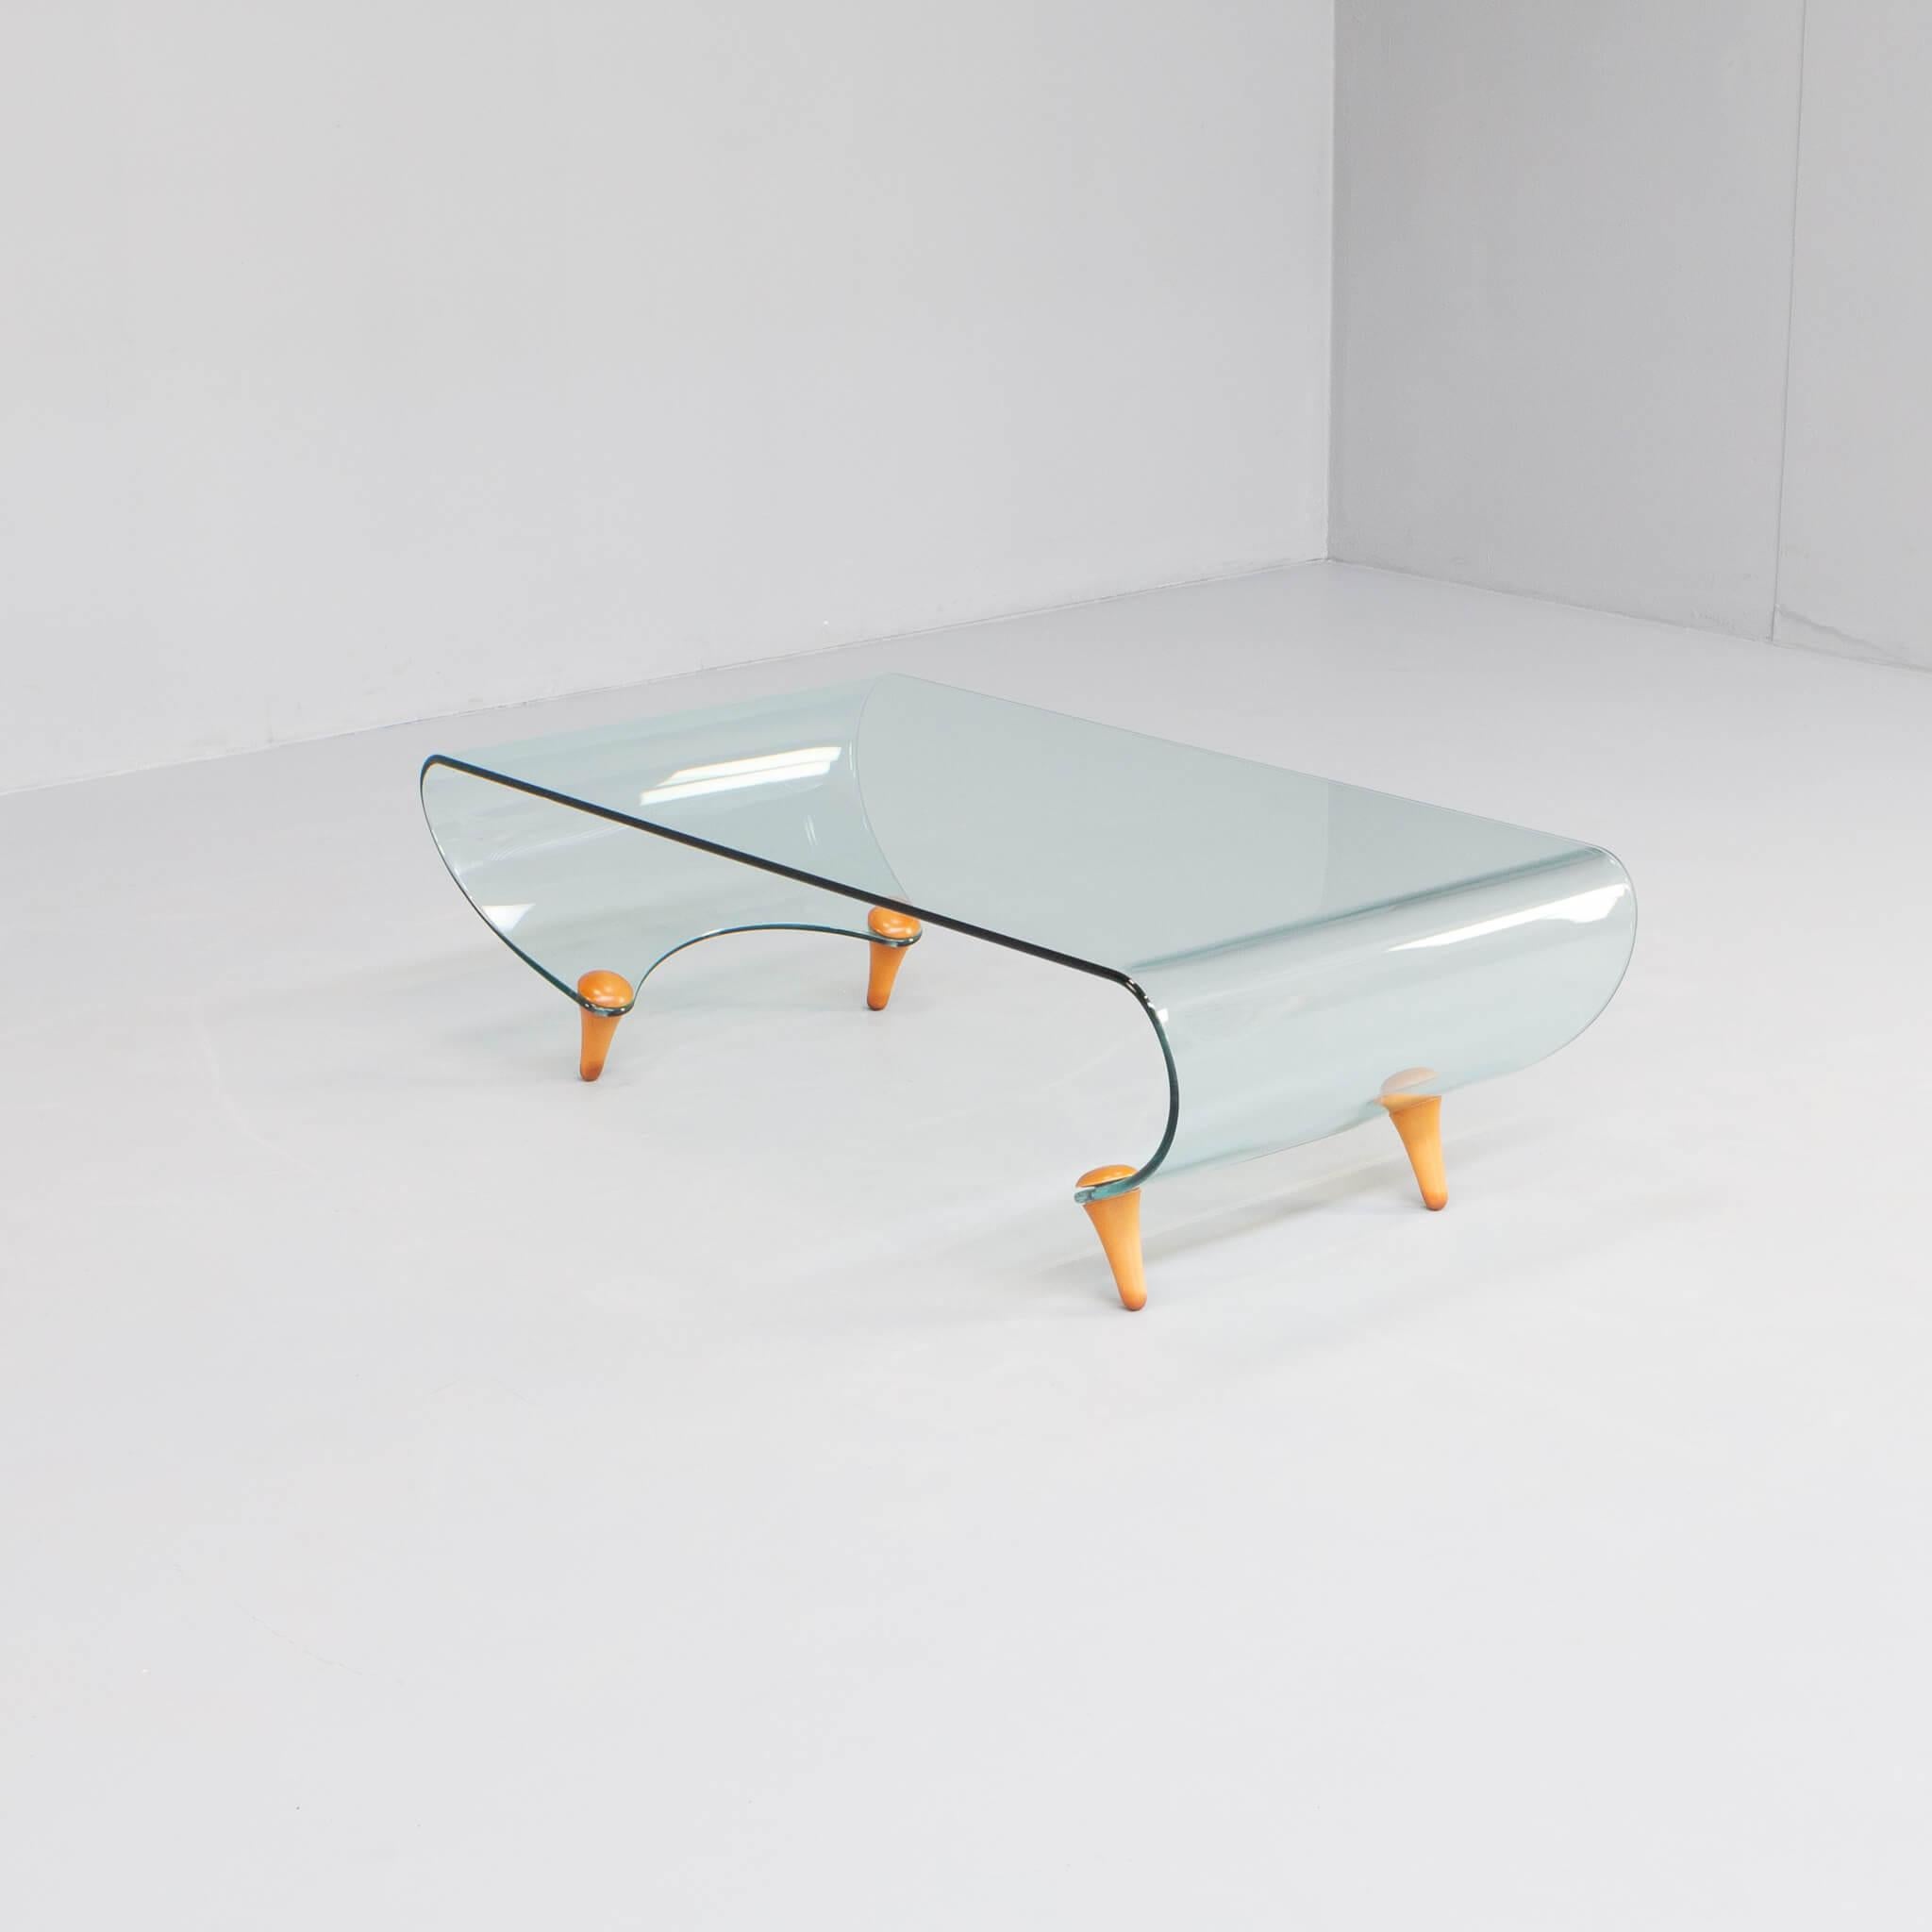 This coffee table was designed in 1996 by Fabio di Bartolomei for Fiam Italy. The table has a curved glass and four wooden legs plan.No longer in production. Signed in the glass: FIAM Italian AB-II. Very good condition.This table is part of the